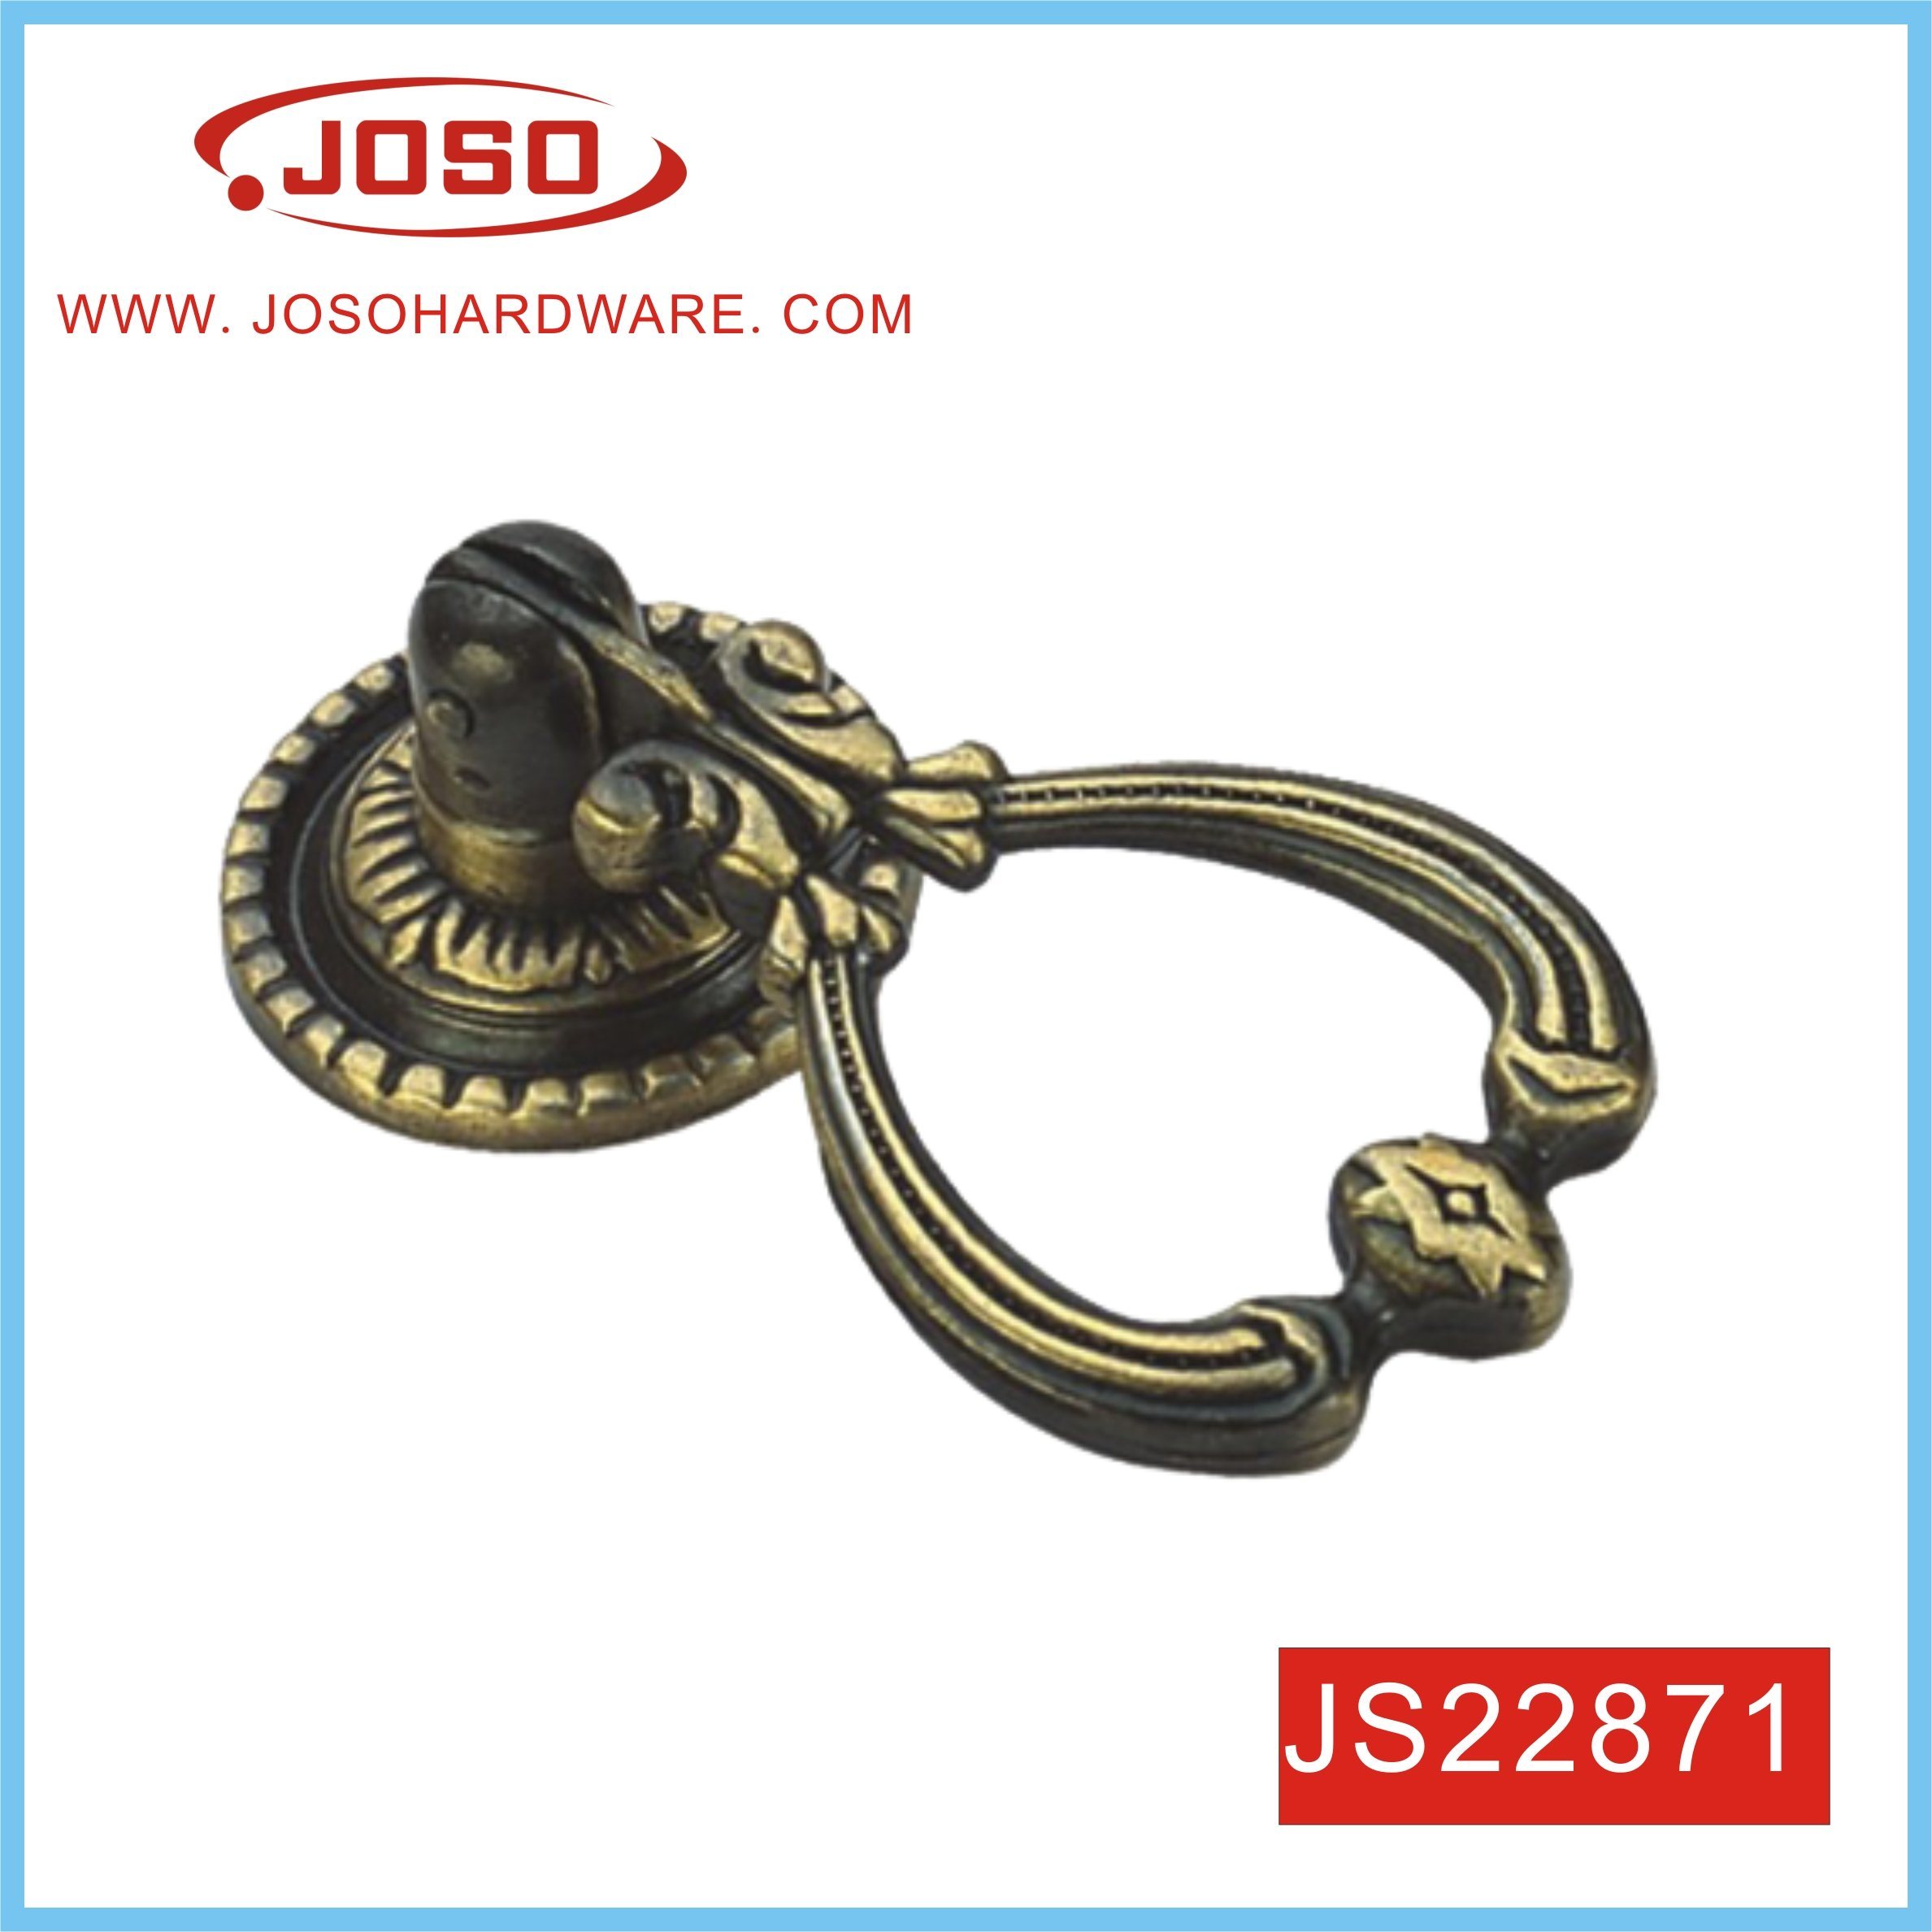 Interior Door Handle for Hall And Closet